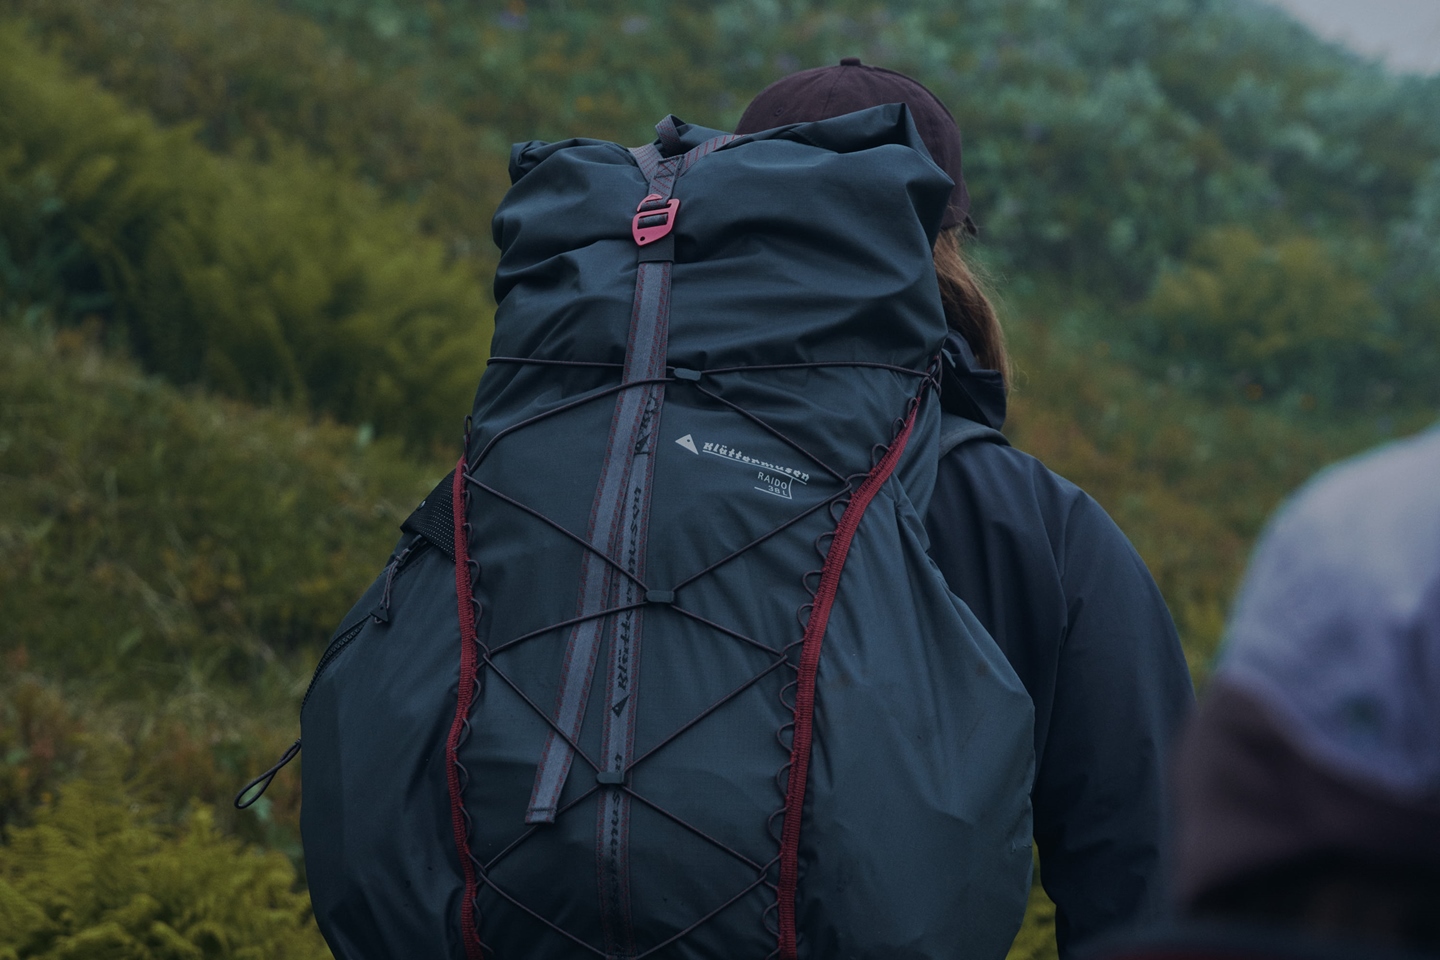 Close-up of backpack during a hike